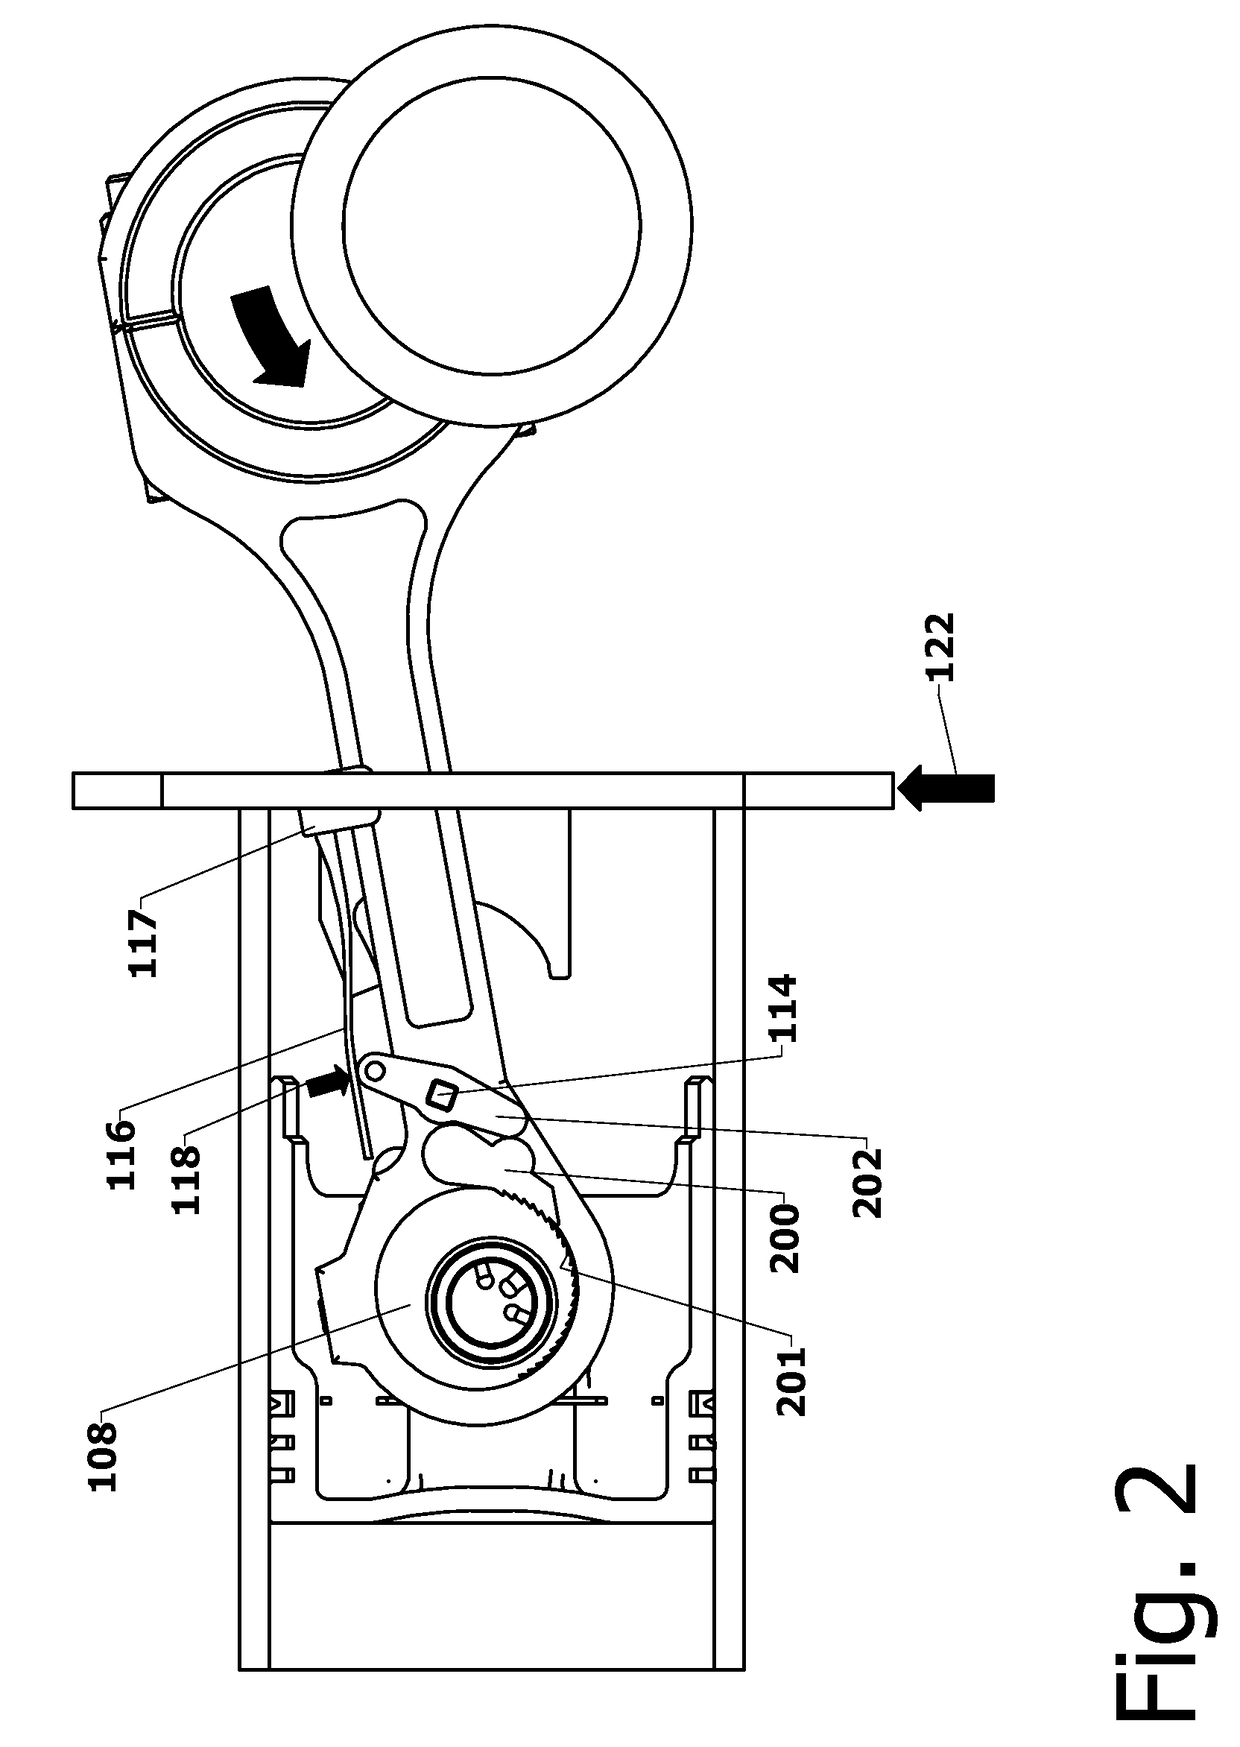 Variable Compression Connecting Rod